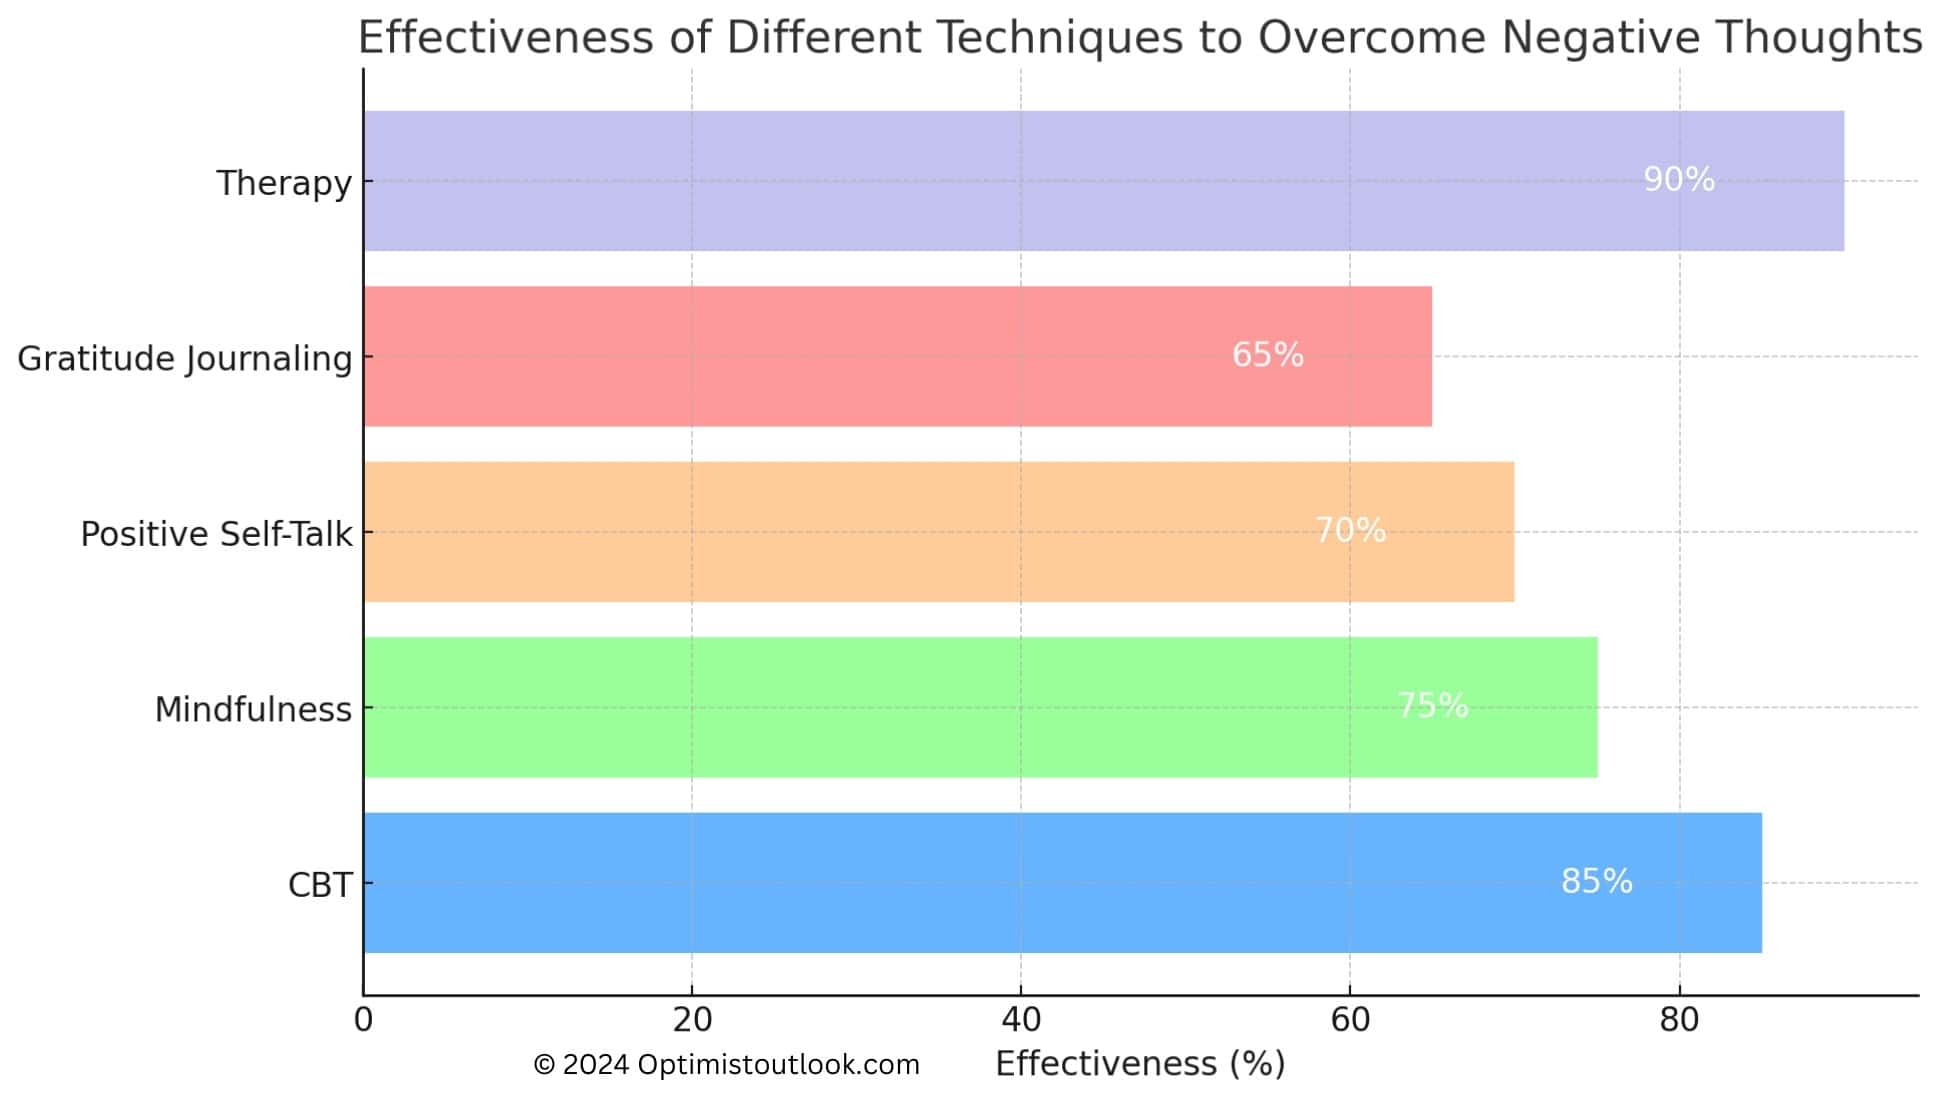 A horizontal bar chart displaying the effectiveness of different techniques to overcome negative thoughts. The techniques are listed on the Y-axis: Therapy, Gratitude Journaling, Positive Self-Talk, Mindfulness, and CBT (Cognitive Behavioral Therapy). The X-axis represents the effectiveness percentage, ranging from 0% to 100%. The effectiveness percentages are marked within the bars, showing Therapy at 90%, Gratitude Journaling at 65%, Positive Self-Talk at 70%, Mindfulness at 75%, and CBT at 85%. Each bar is colored differently.